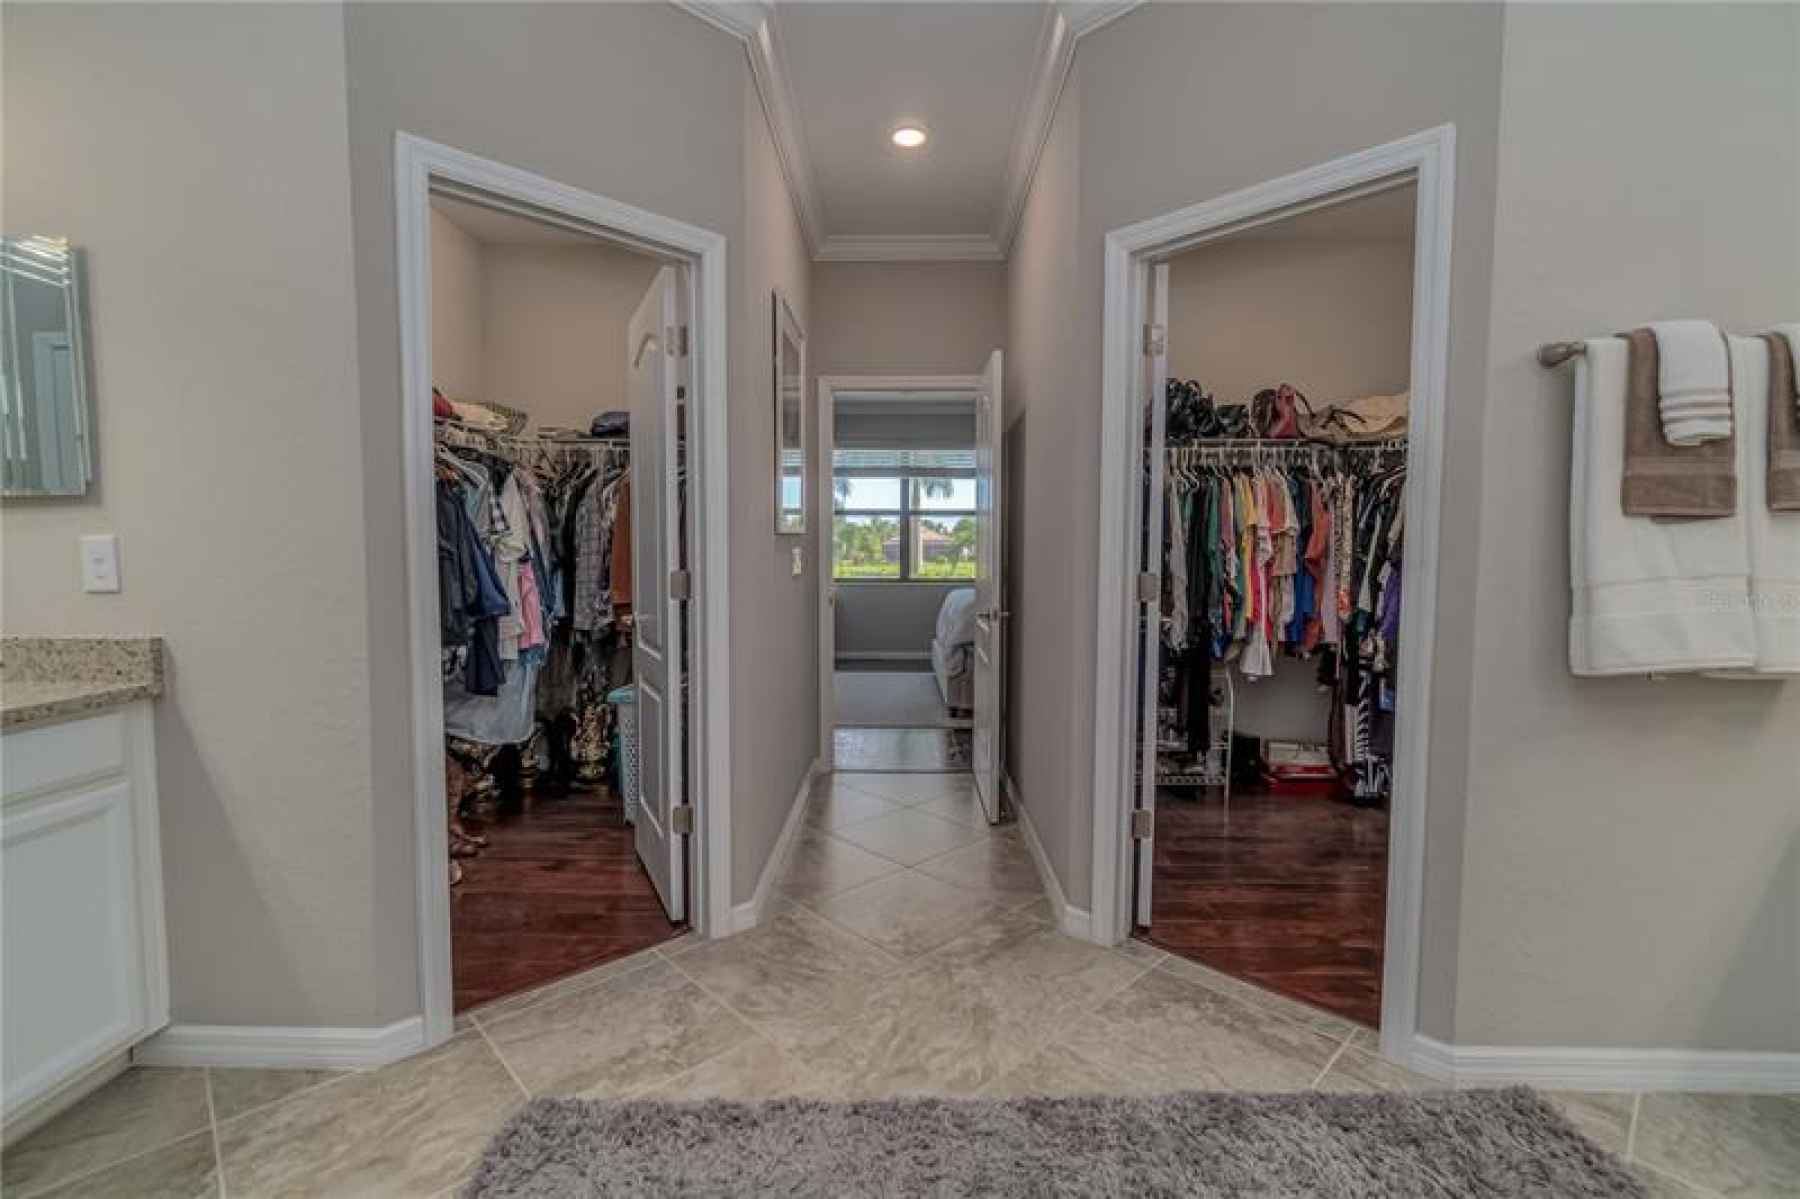 HIS AND HERS MASTER CLOSETS